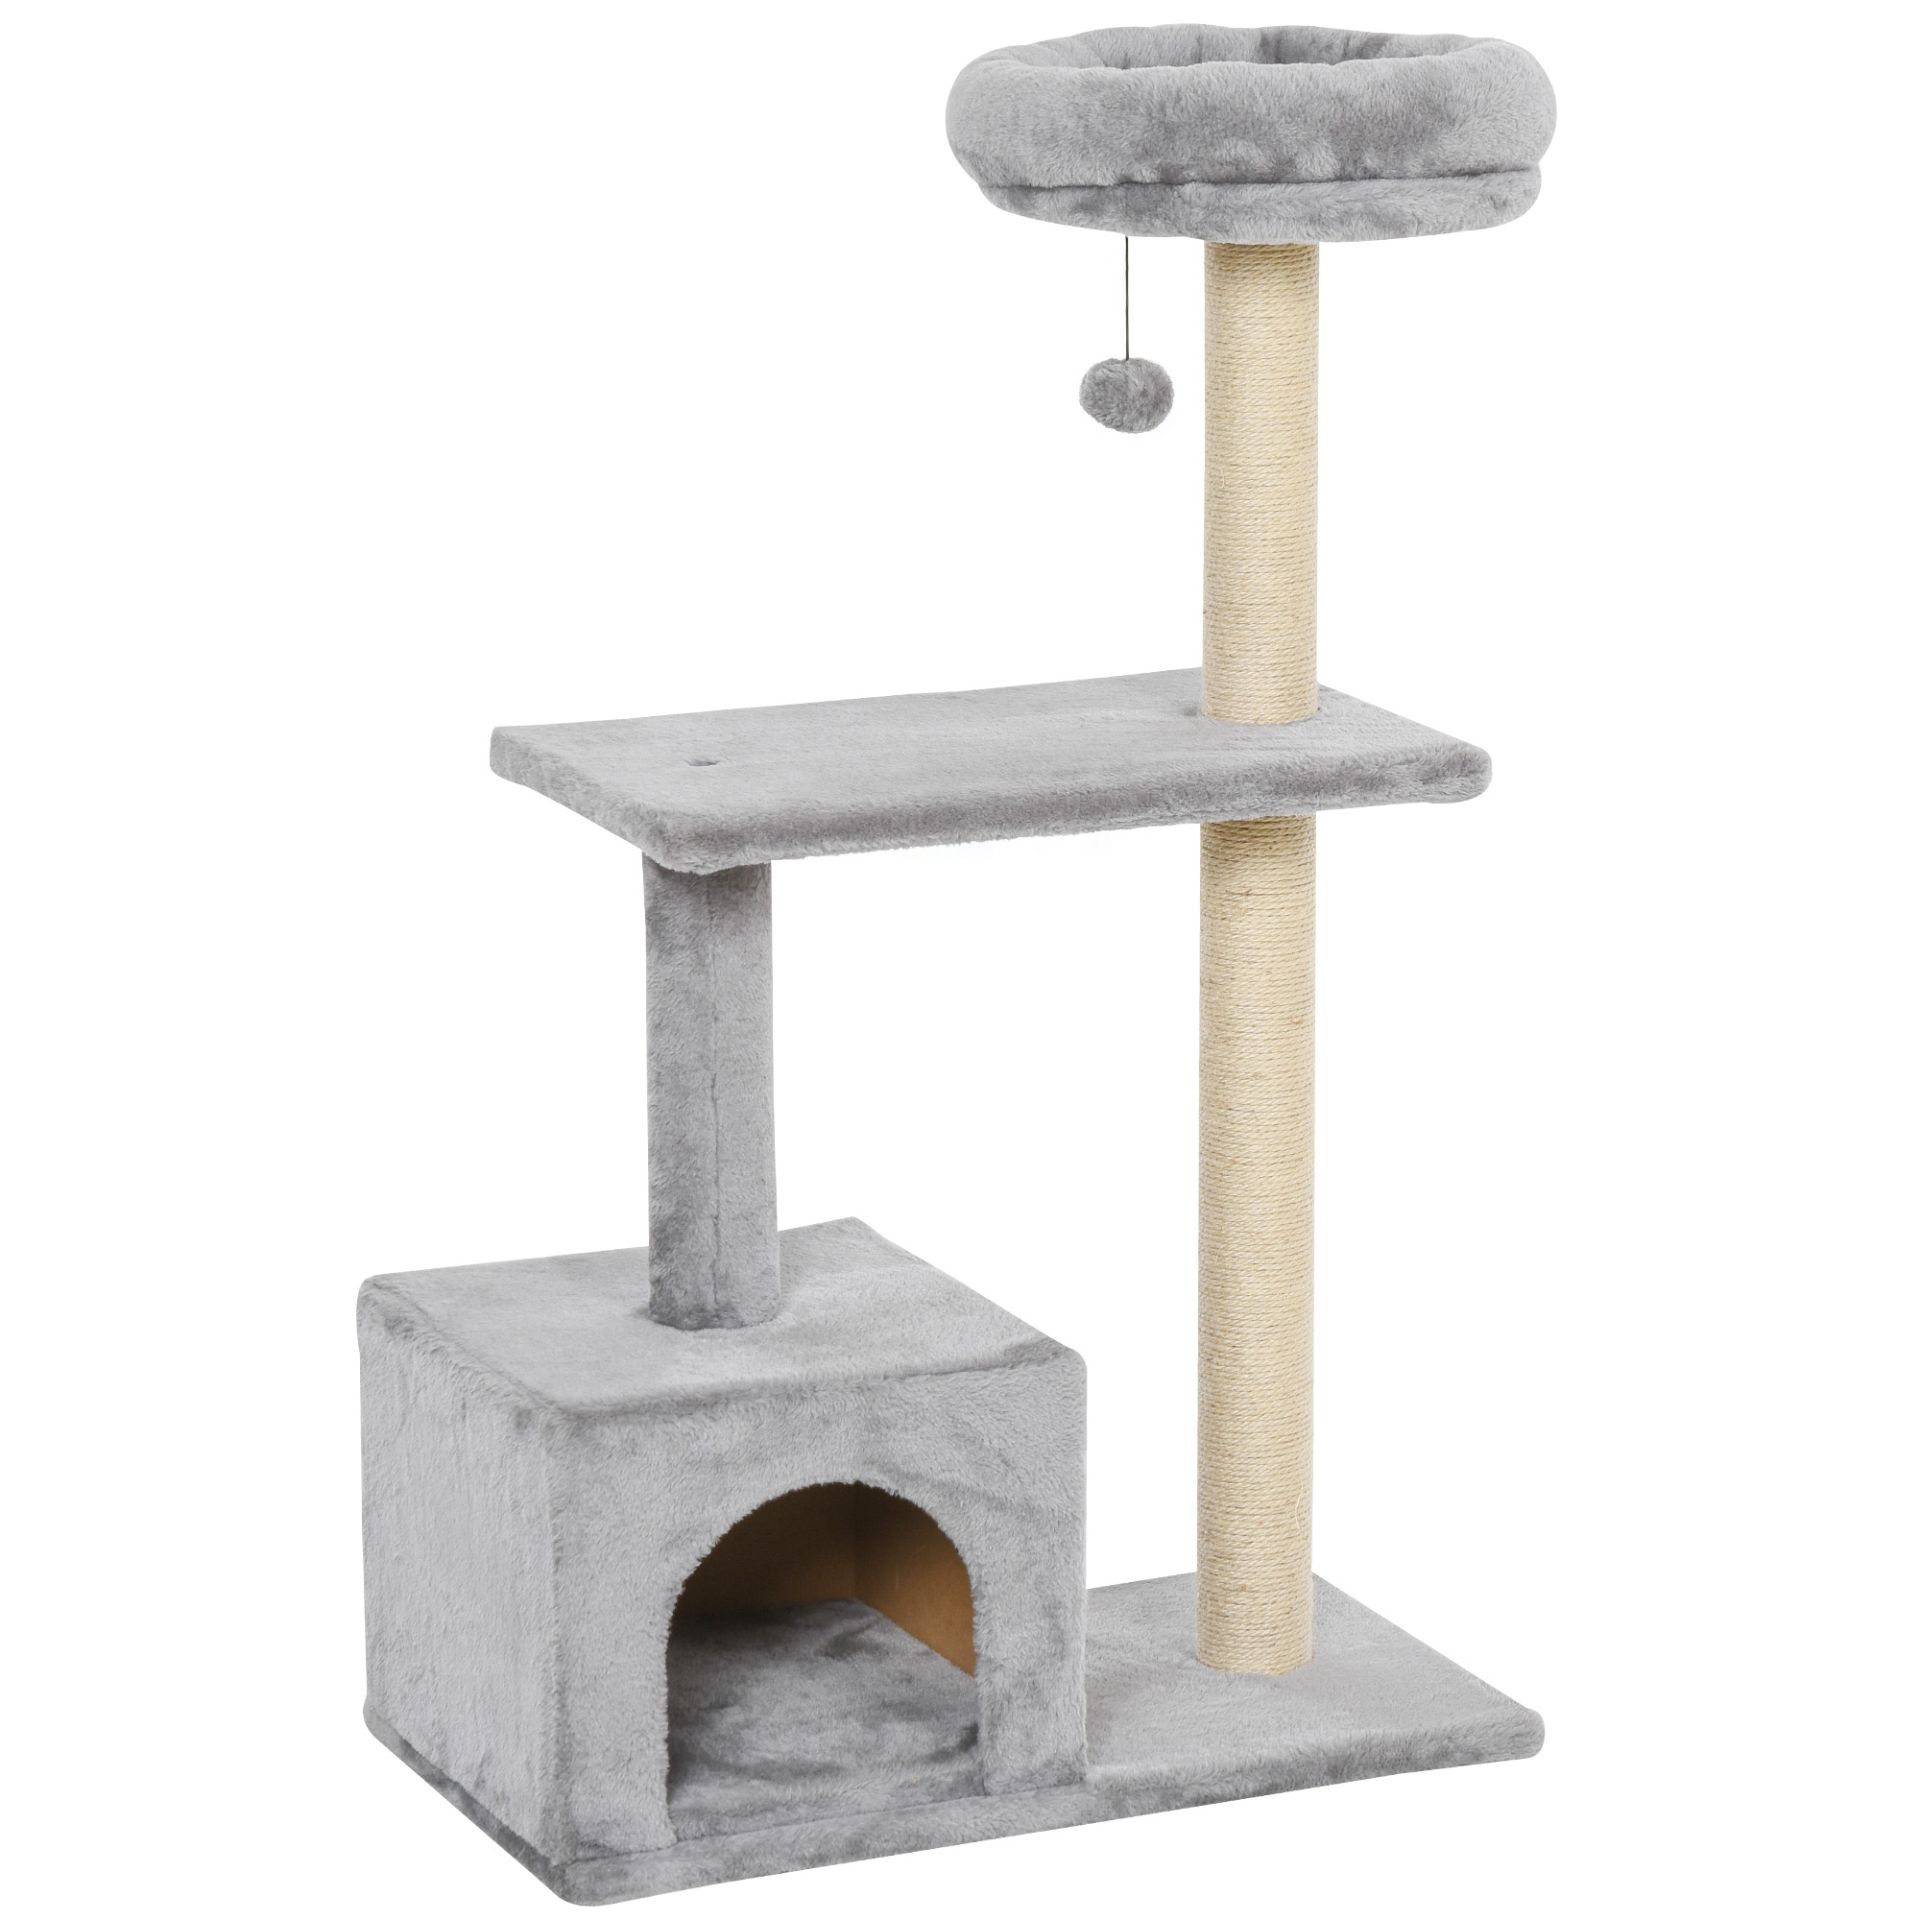 PawHut 96cm Cat Tree for Indoor Cats Condo Sisal Scratching Post Cat Tower Kitten Play House Dangling Ball Activity Center Furniture Grey